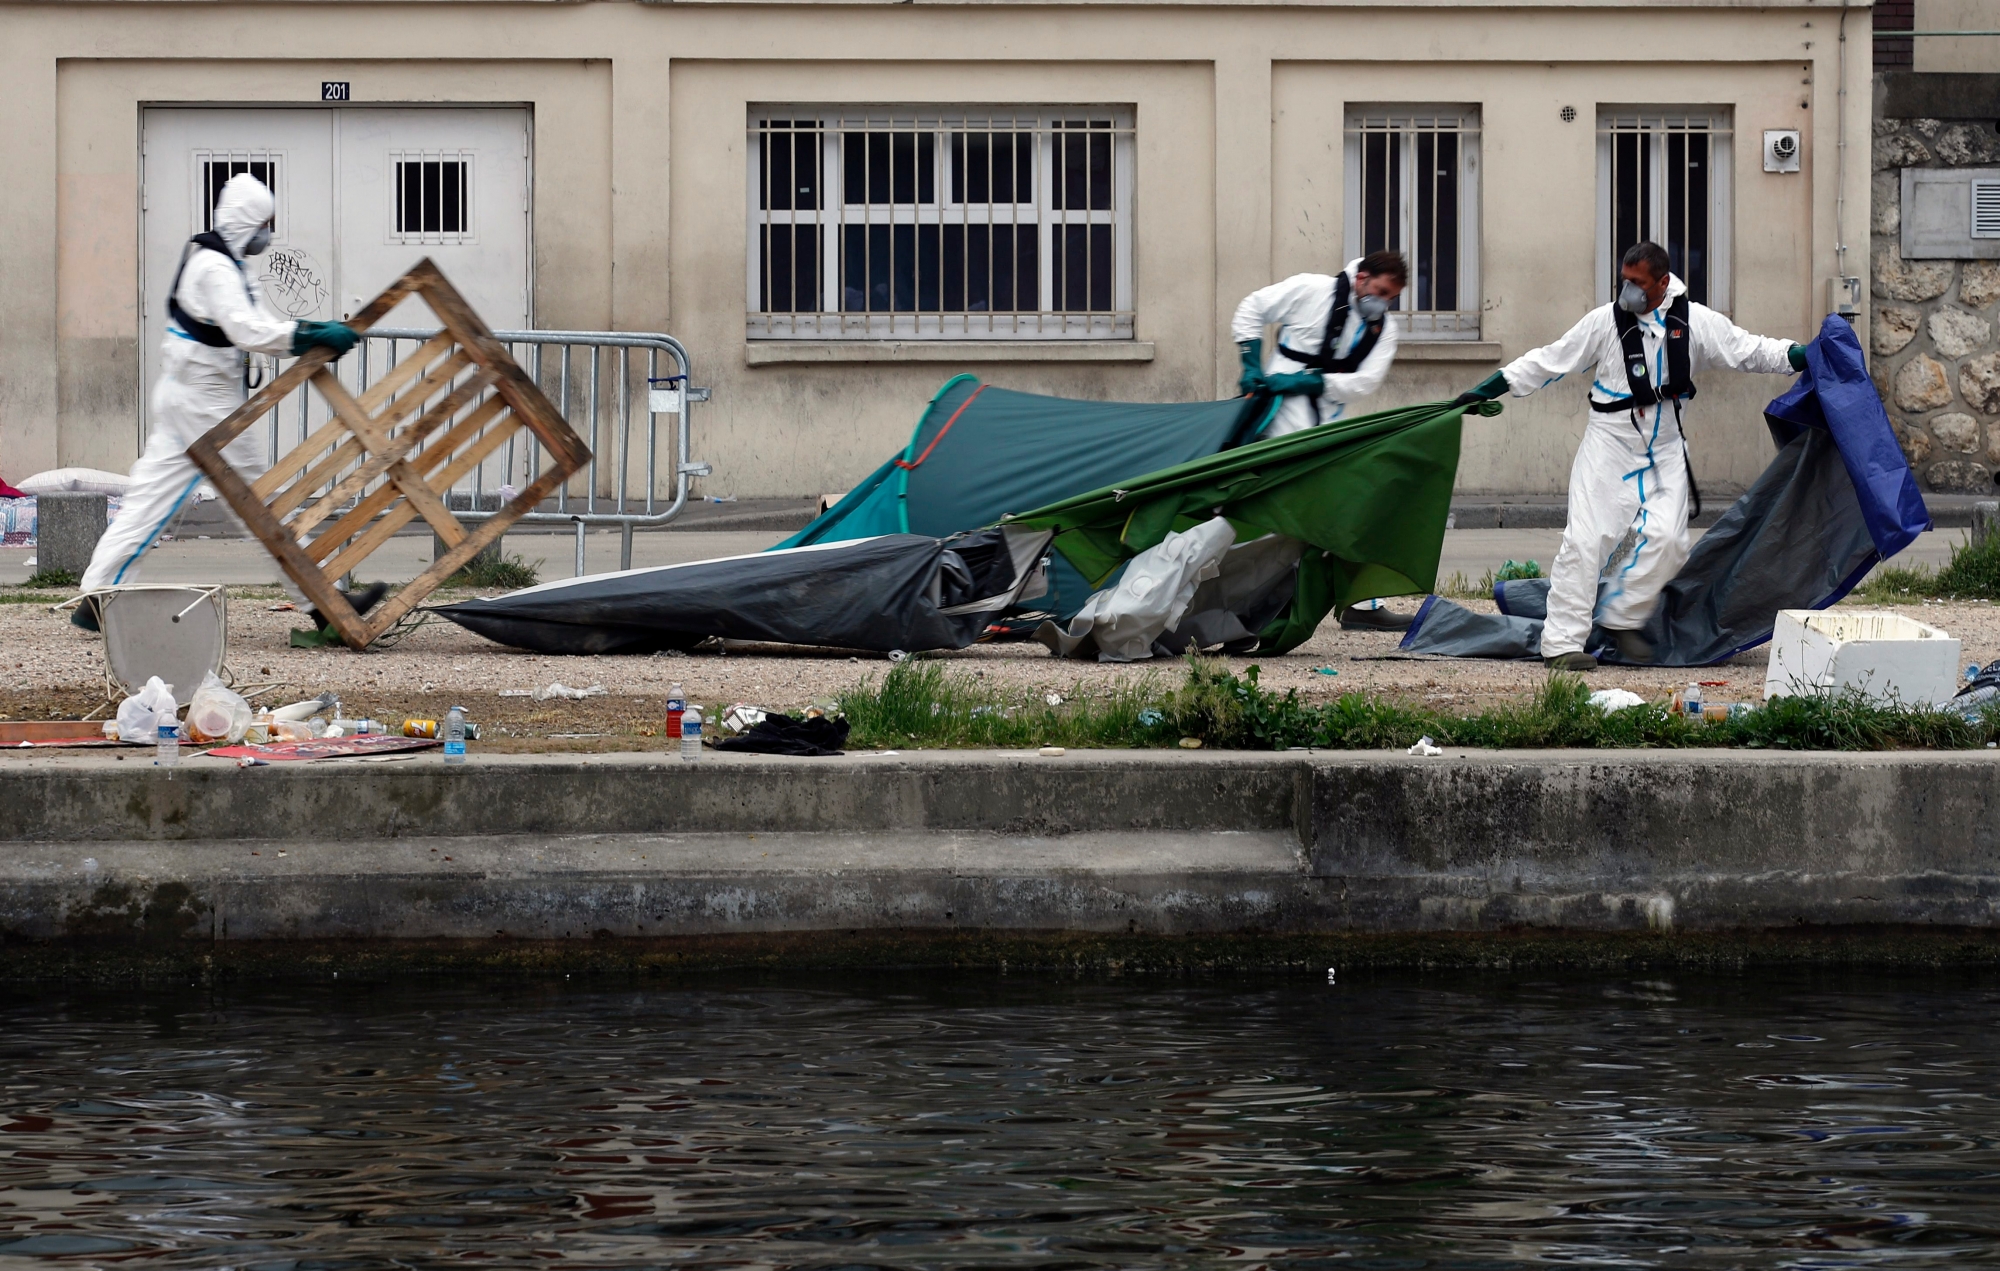 Employees remove tents to clear out a makeshift migrant camp along side of the canal Saint Martin, in central Paris, France, Monday, June 4, 2018. French police have evacuated around 500 migrants, mostly Afghans but some Africans from a makeshift tent encampment. (AP Photo/Francois Mori) France Migrants